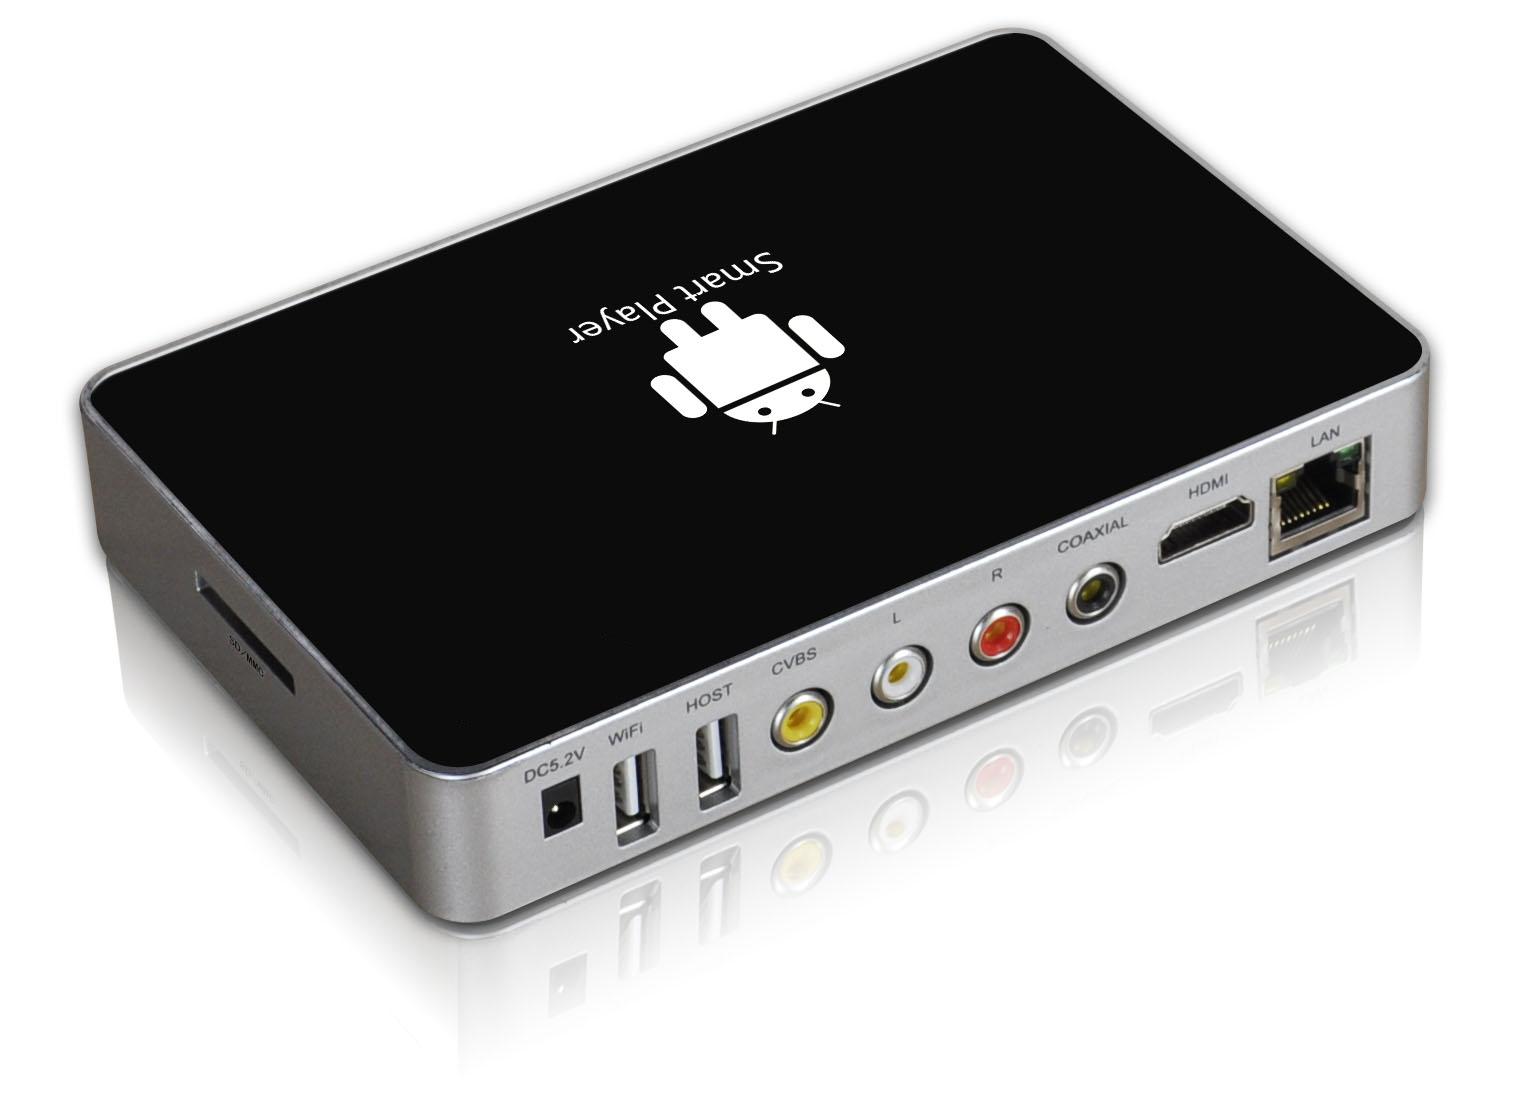 https://topgadgetreview.files.wordpress.com/2015/04/all-in-one-android-tv-internet-box-with-wifi-bluetooth-and-hdmi.jpg